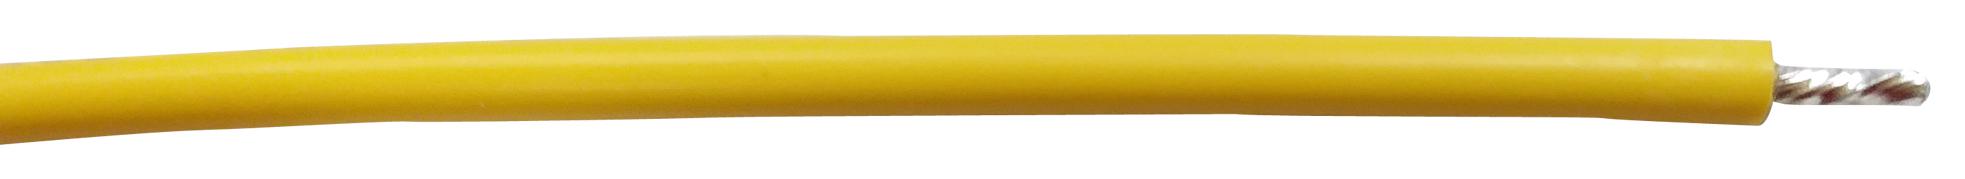 PP002360 HOOK-UP WIRE, 20AWG, YELLOW, 305M, 600V PRO POWER